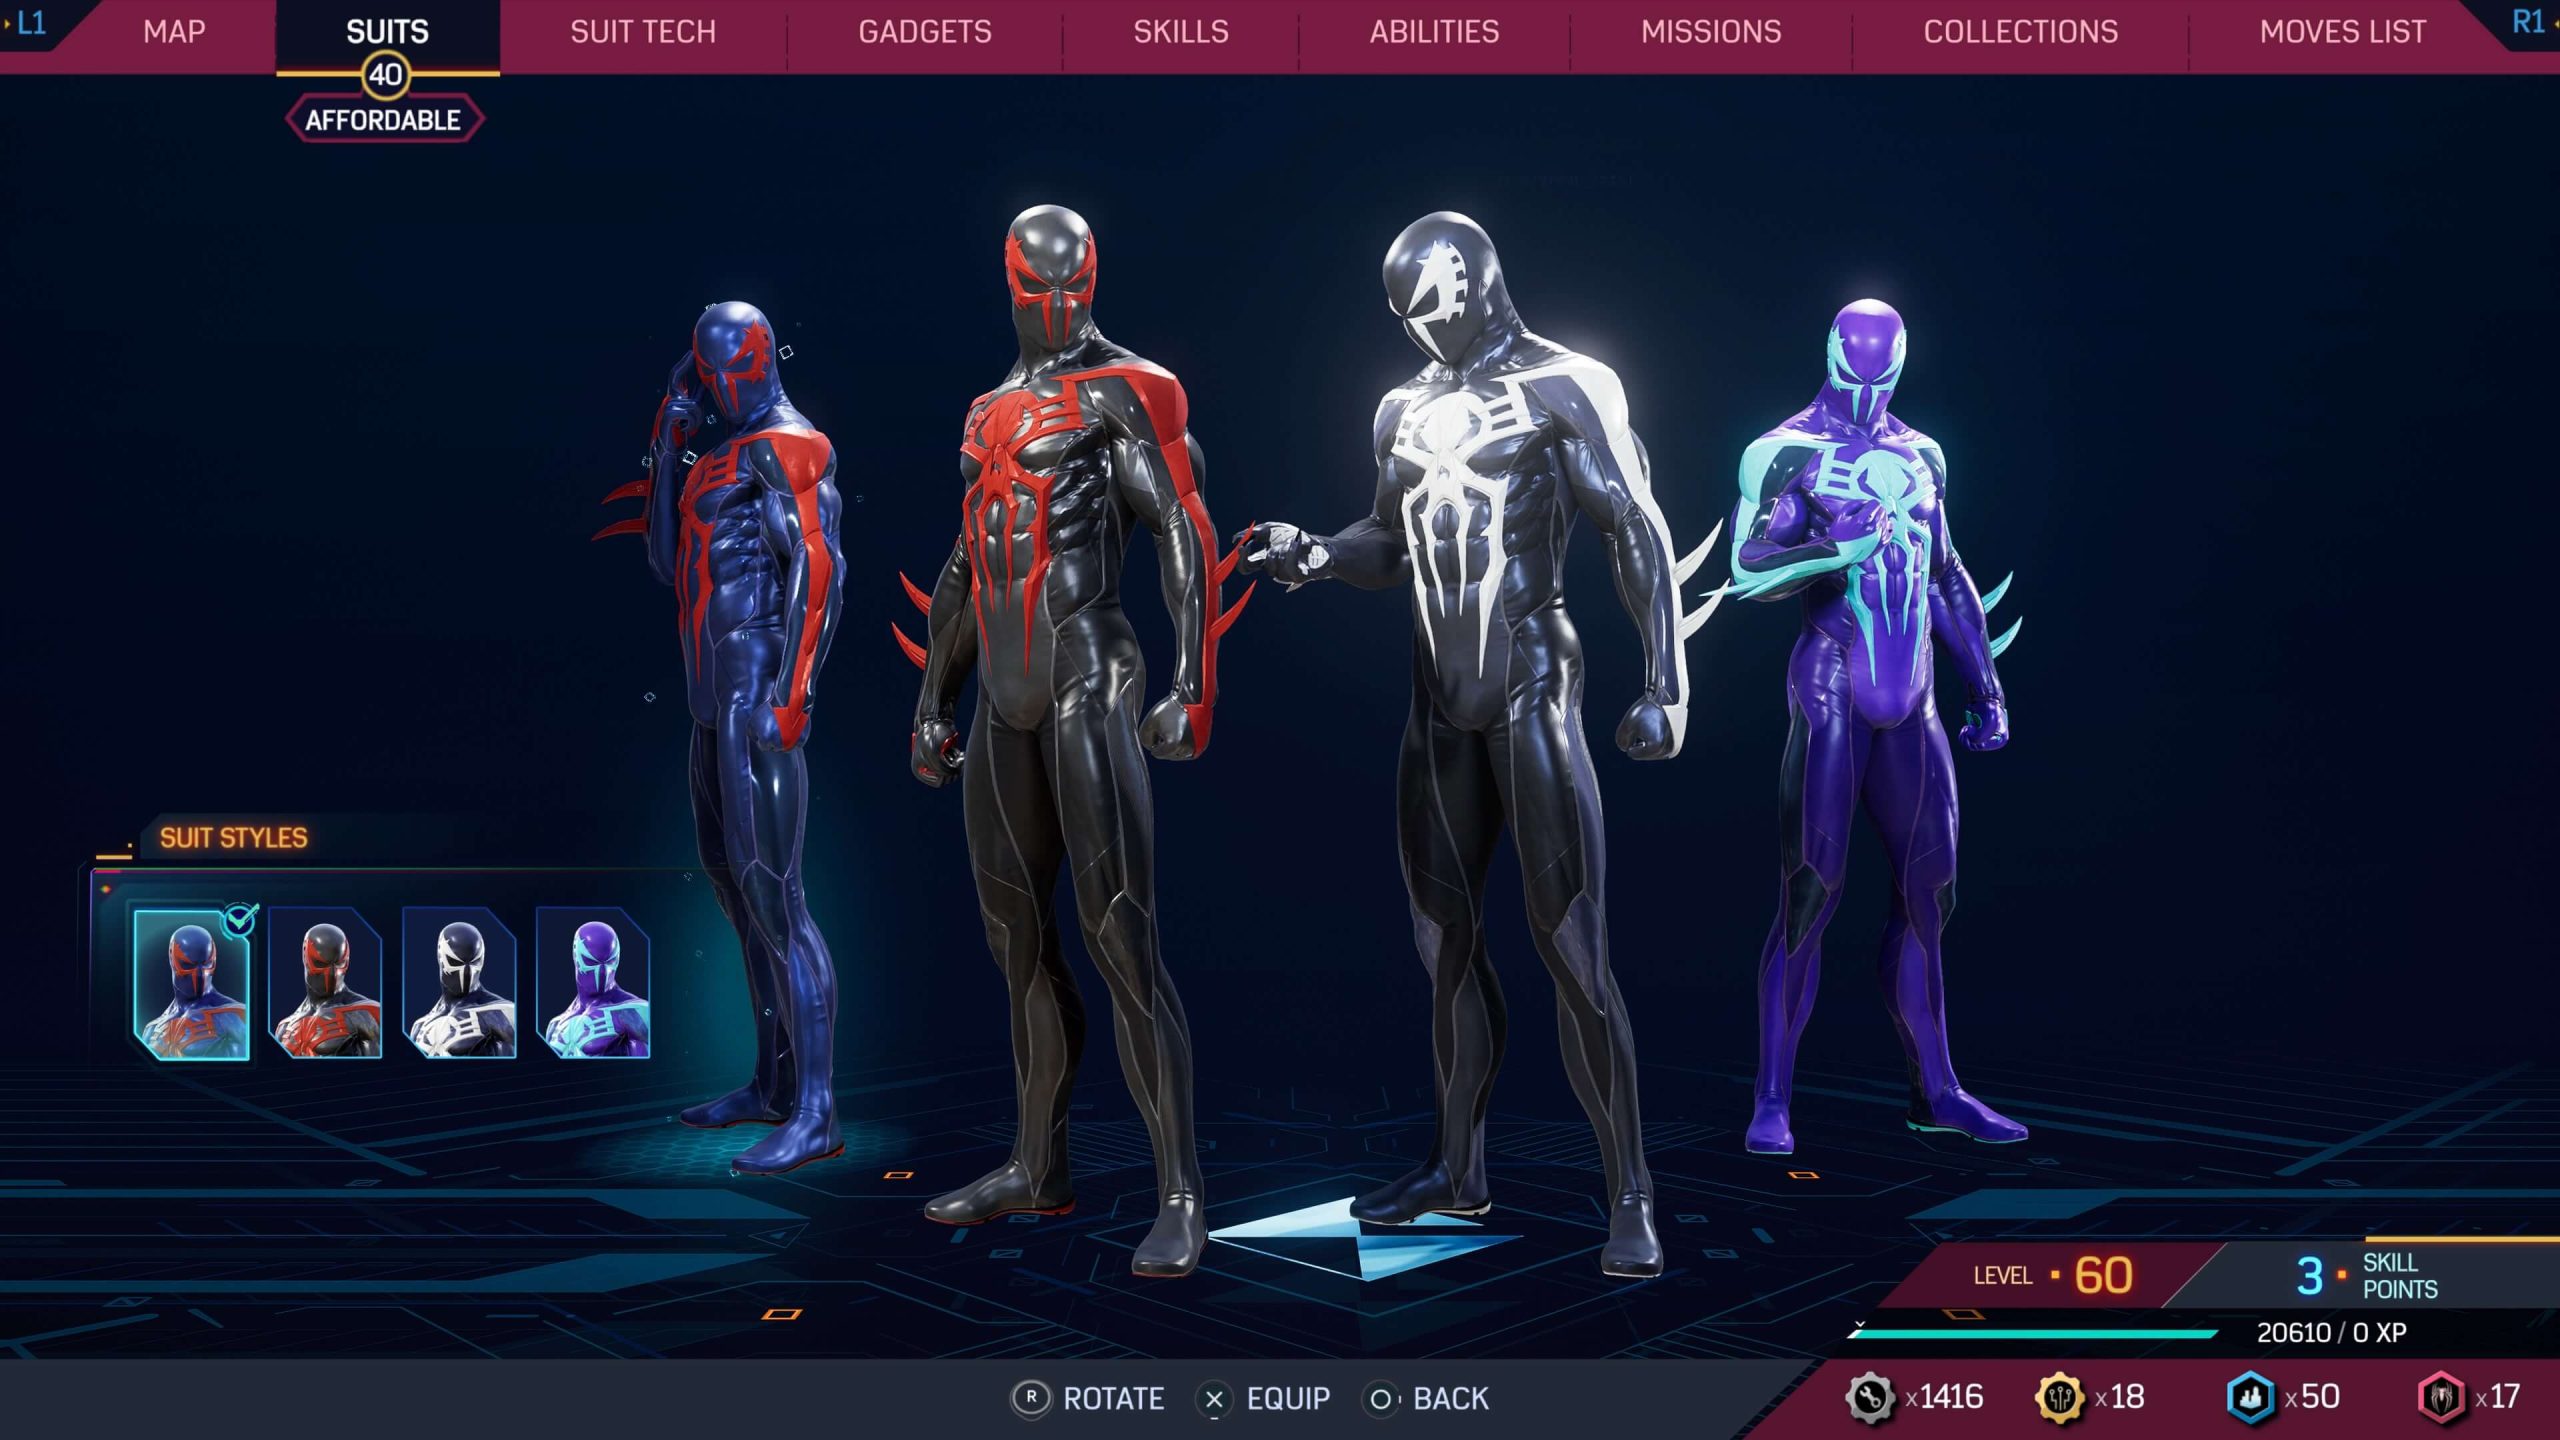 The 2099 suit in Marvel's Spider-Man 2 can get me by while I wait.